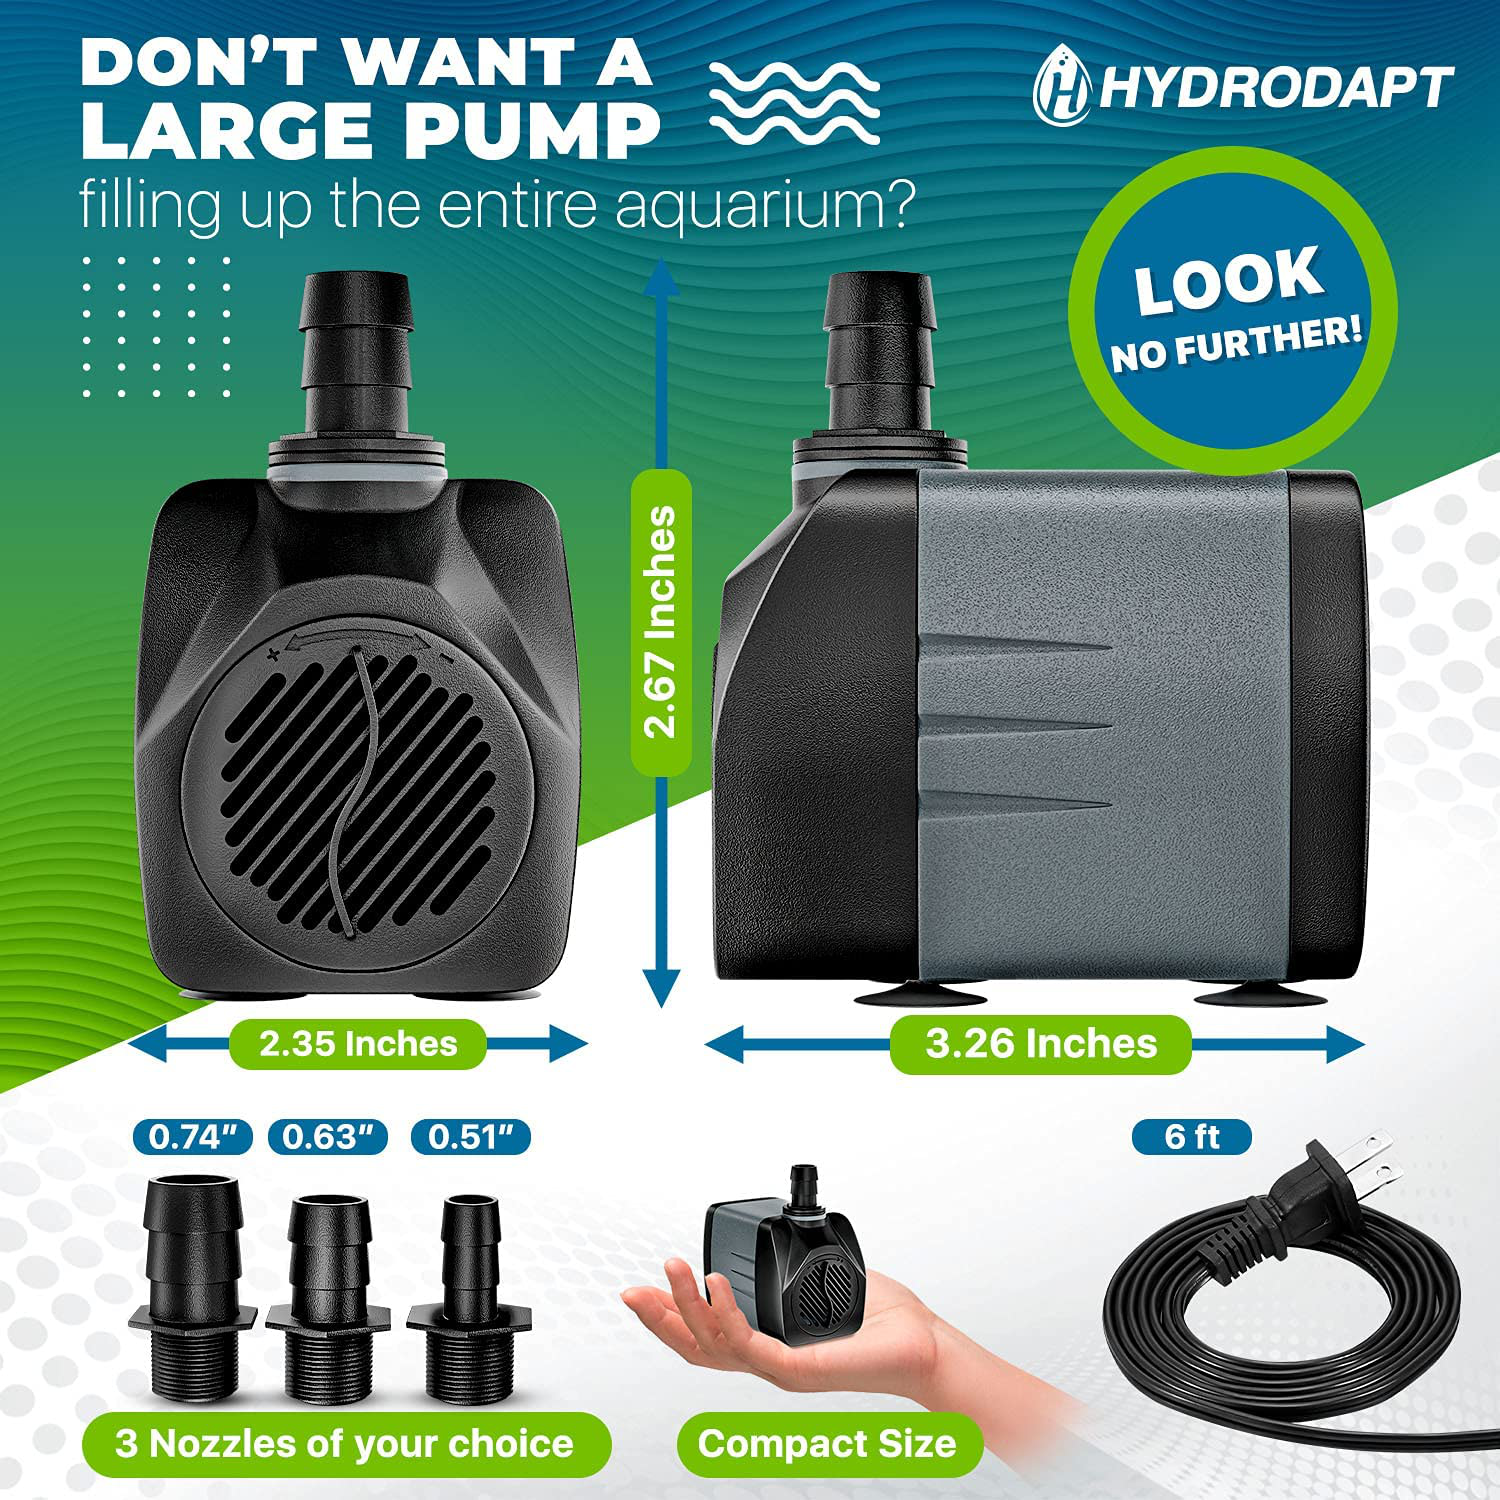 Water Pump Aquarium| Submersible Water Pump 25W | Small & Portable 400Gph Pump - Perfect for Ponds, Fountains, Aquariums & More | 7 Ft Height Lift | Connects to Almost Any Hose/Tubing | Quiet Motor Animals & Pet Supplies > Pet Supplies > Fish Supplies > Aquarium & Pond Tubing Hydrodapt   